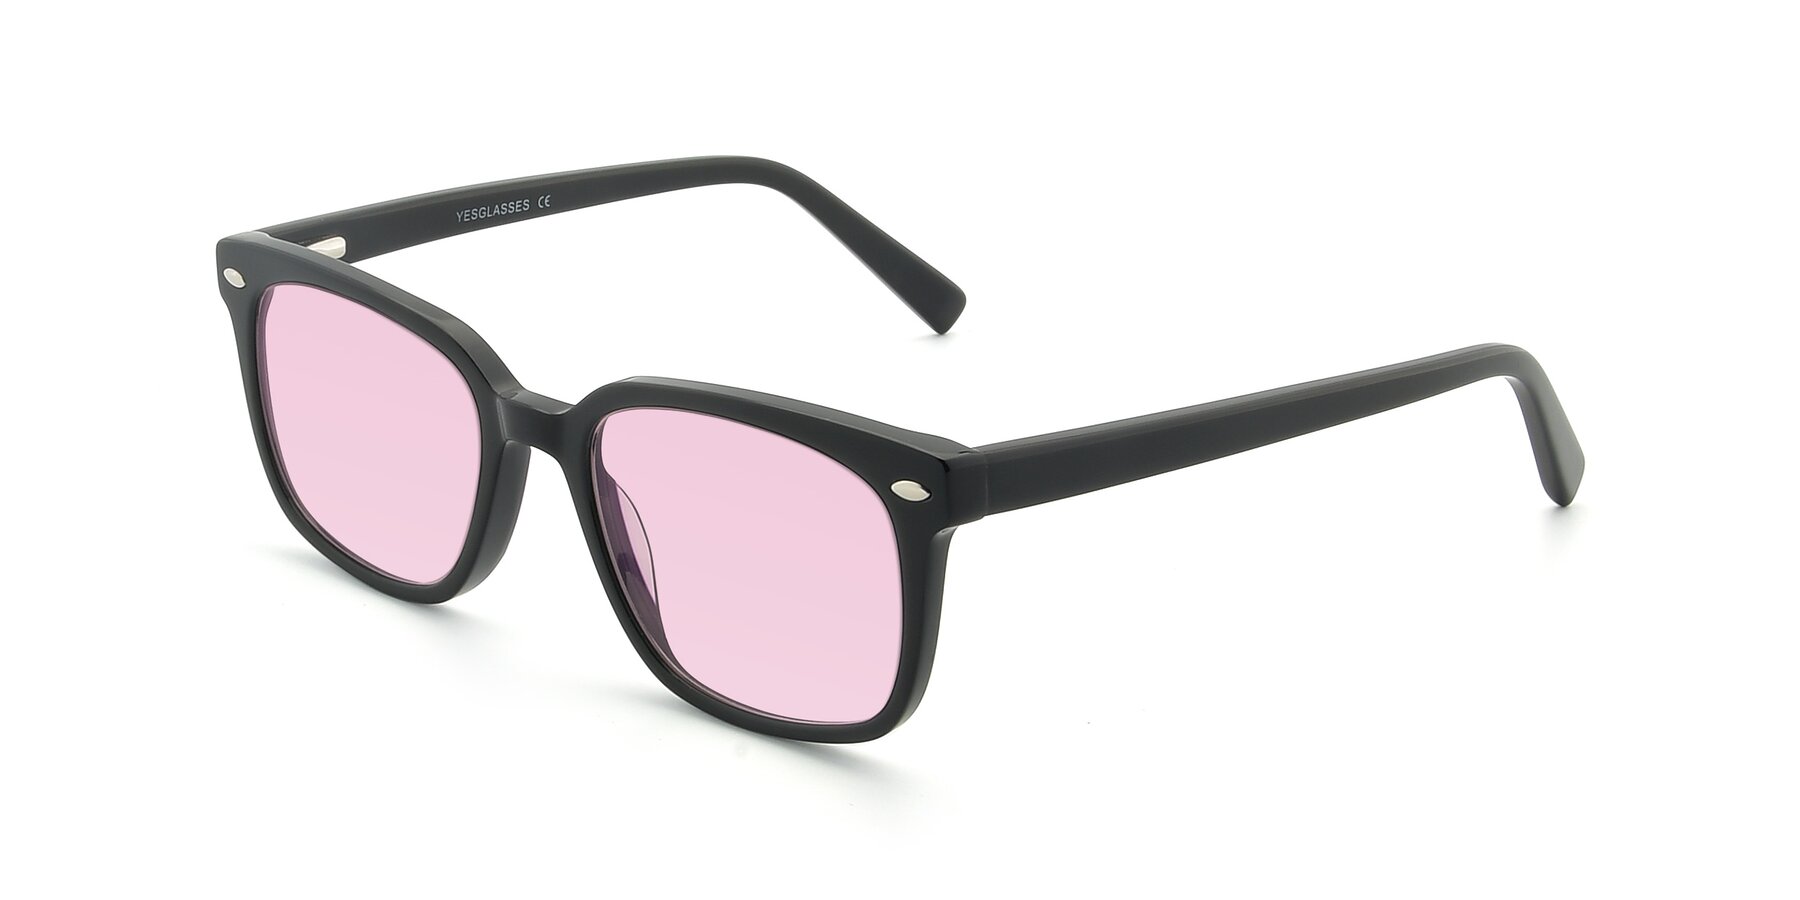 Angle of 17349 in Black with Light Pink Tinted Lenses